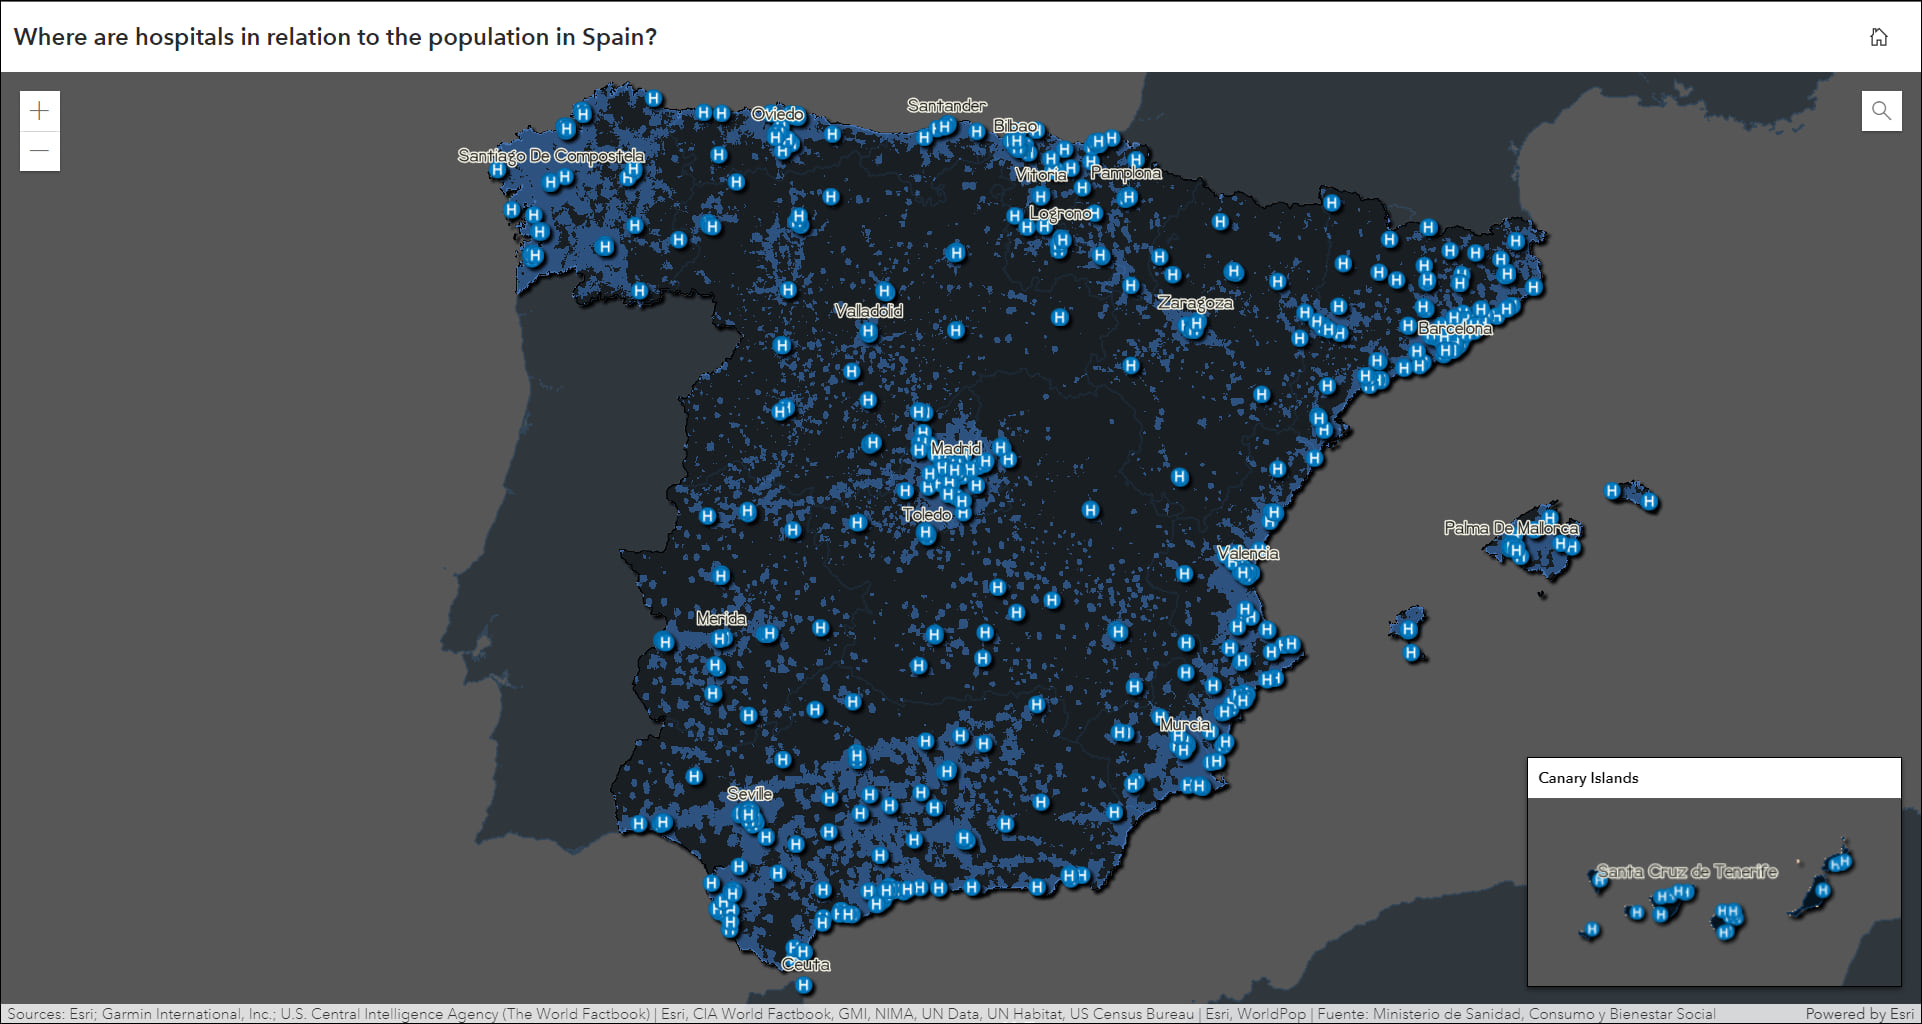 Hospital locations and population data mapped in Spain with the Canary Islands in an inset map on the bottom right.